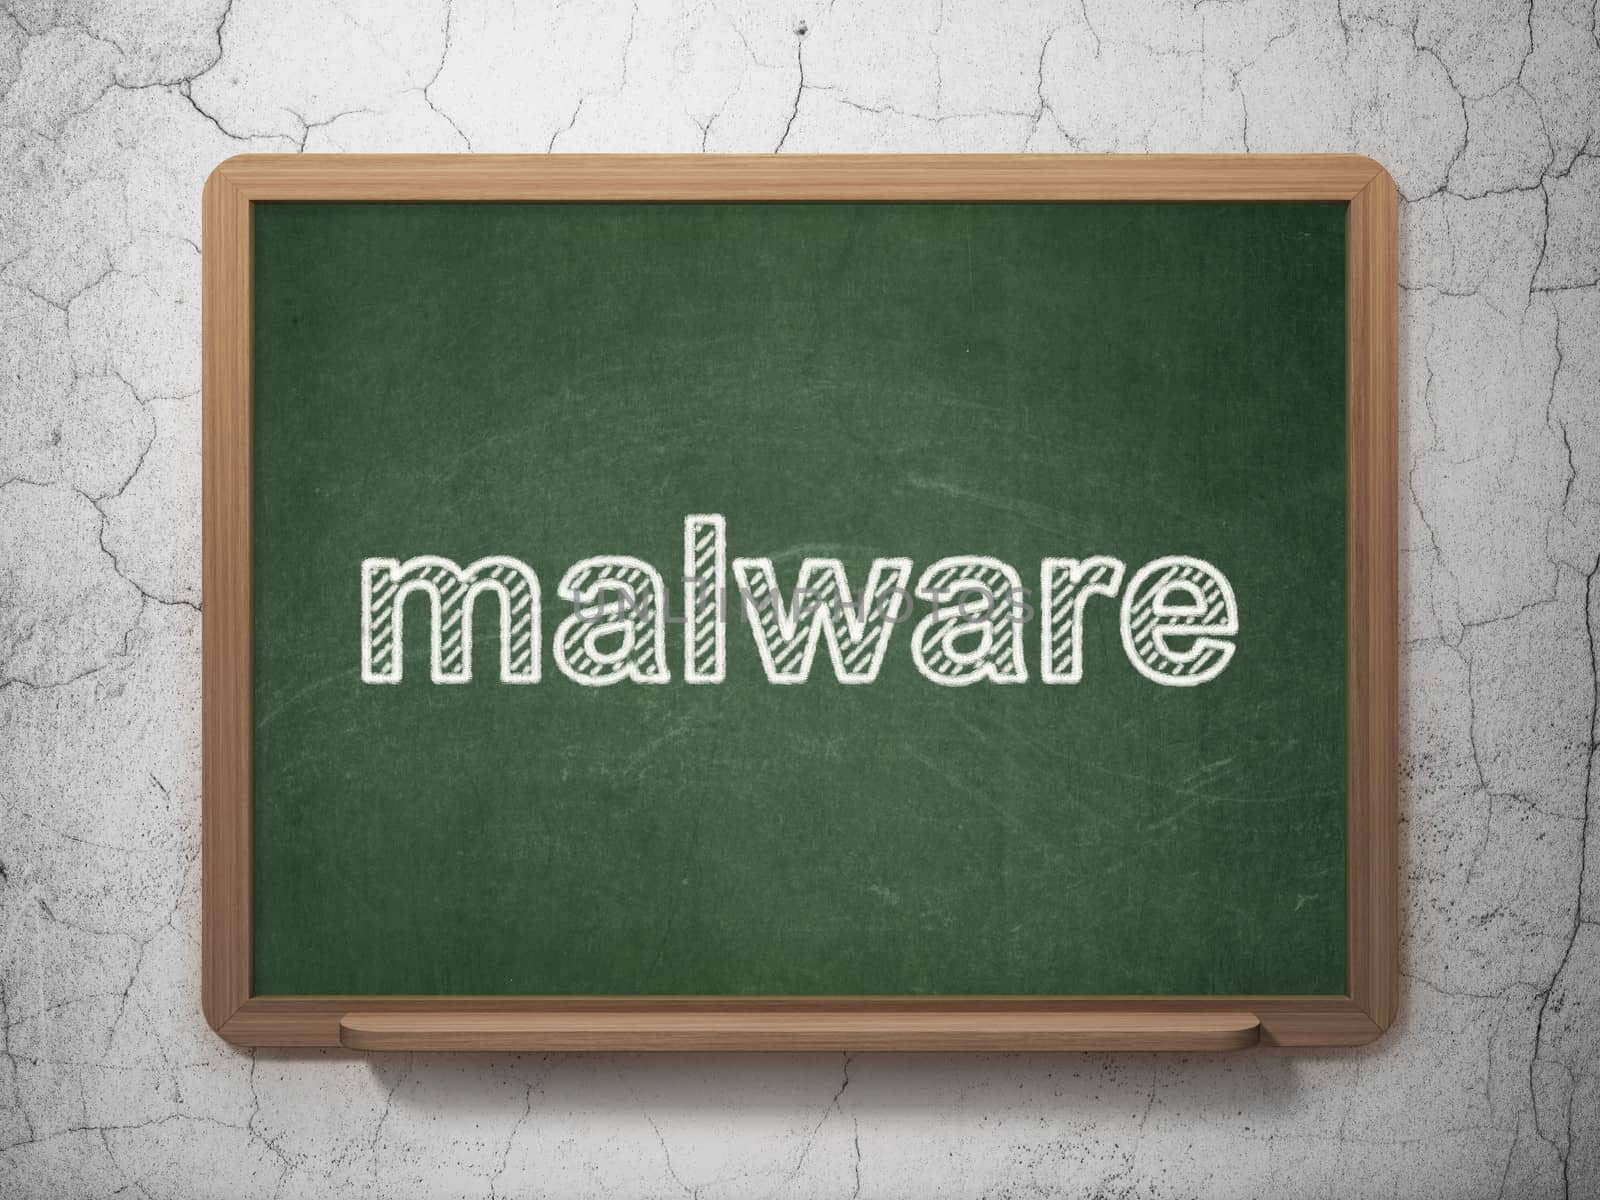 Protection concept: Malware on chalkboard background by maxkabakov